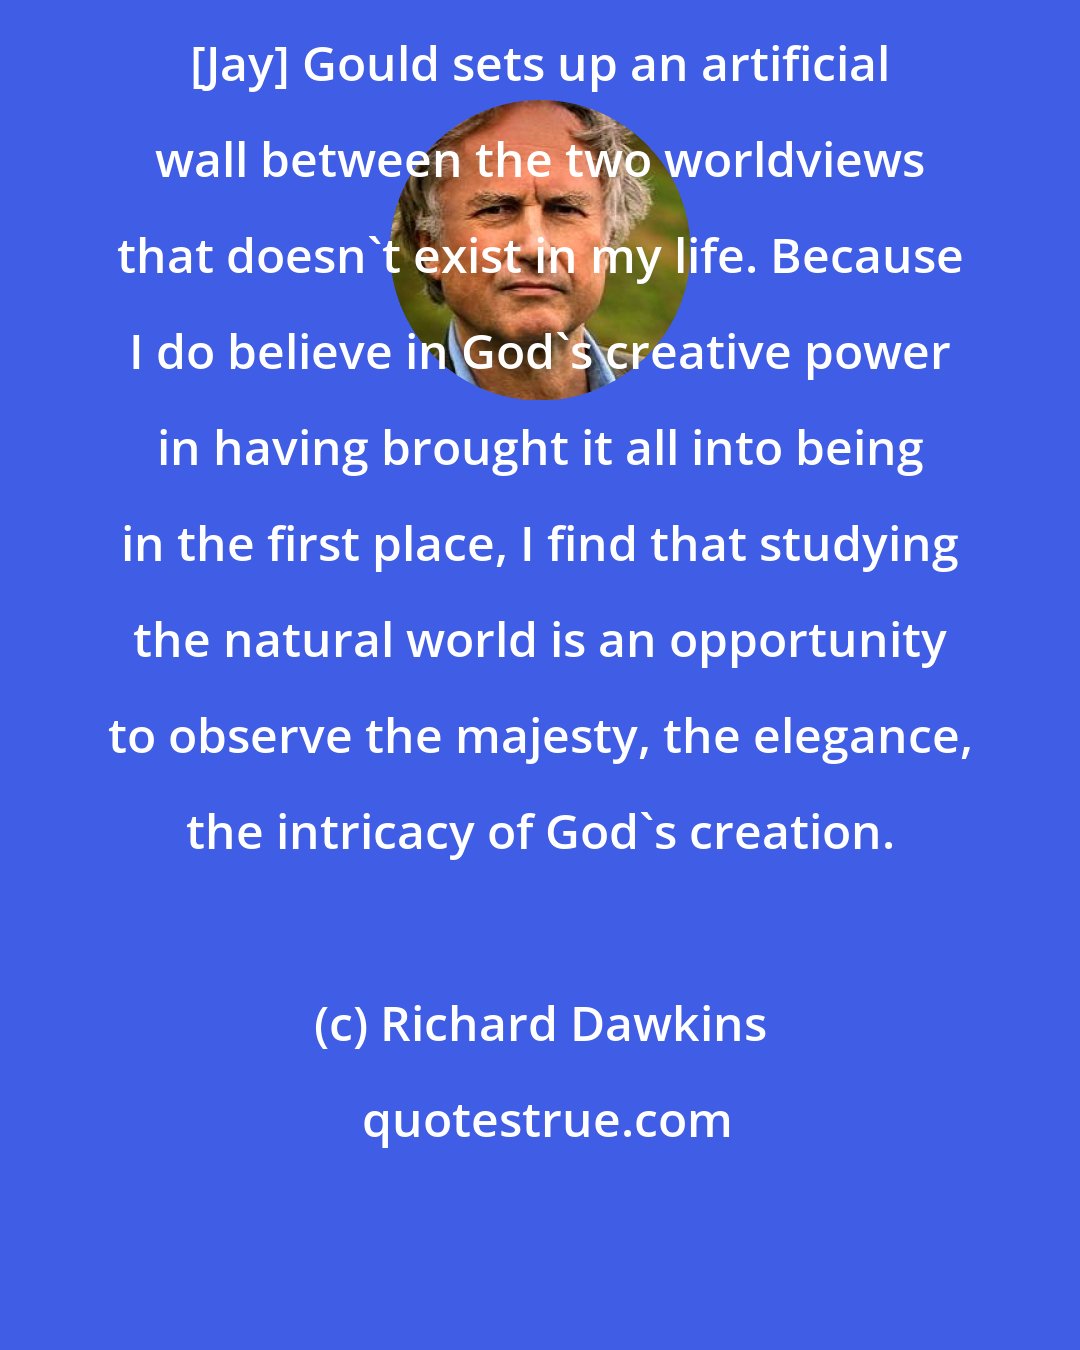 Richard Dawkins: [Jay] Gould sets up an artificial wall between the two worldviews that doesn't exist in my life. Because I do believe in God's creative power in having brought it all into being in the first place, I find that studying the natural world is an opportunity to observe the majesty, the elegance, the intricacy of God's creation.